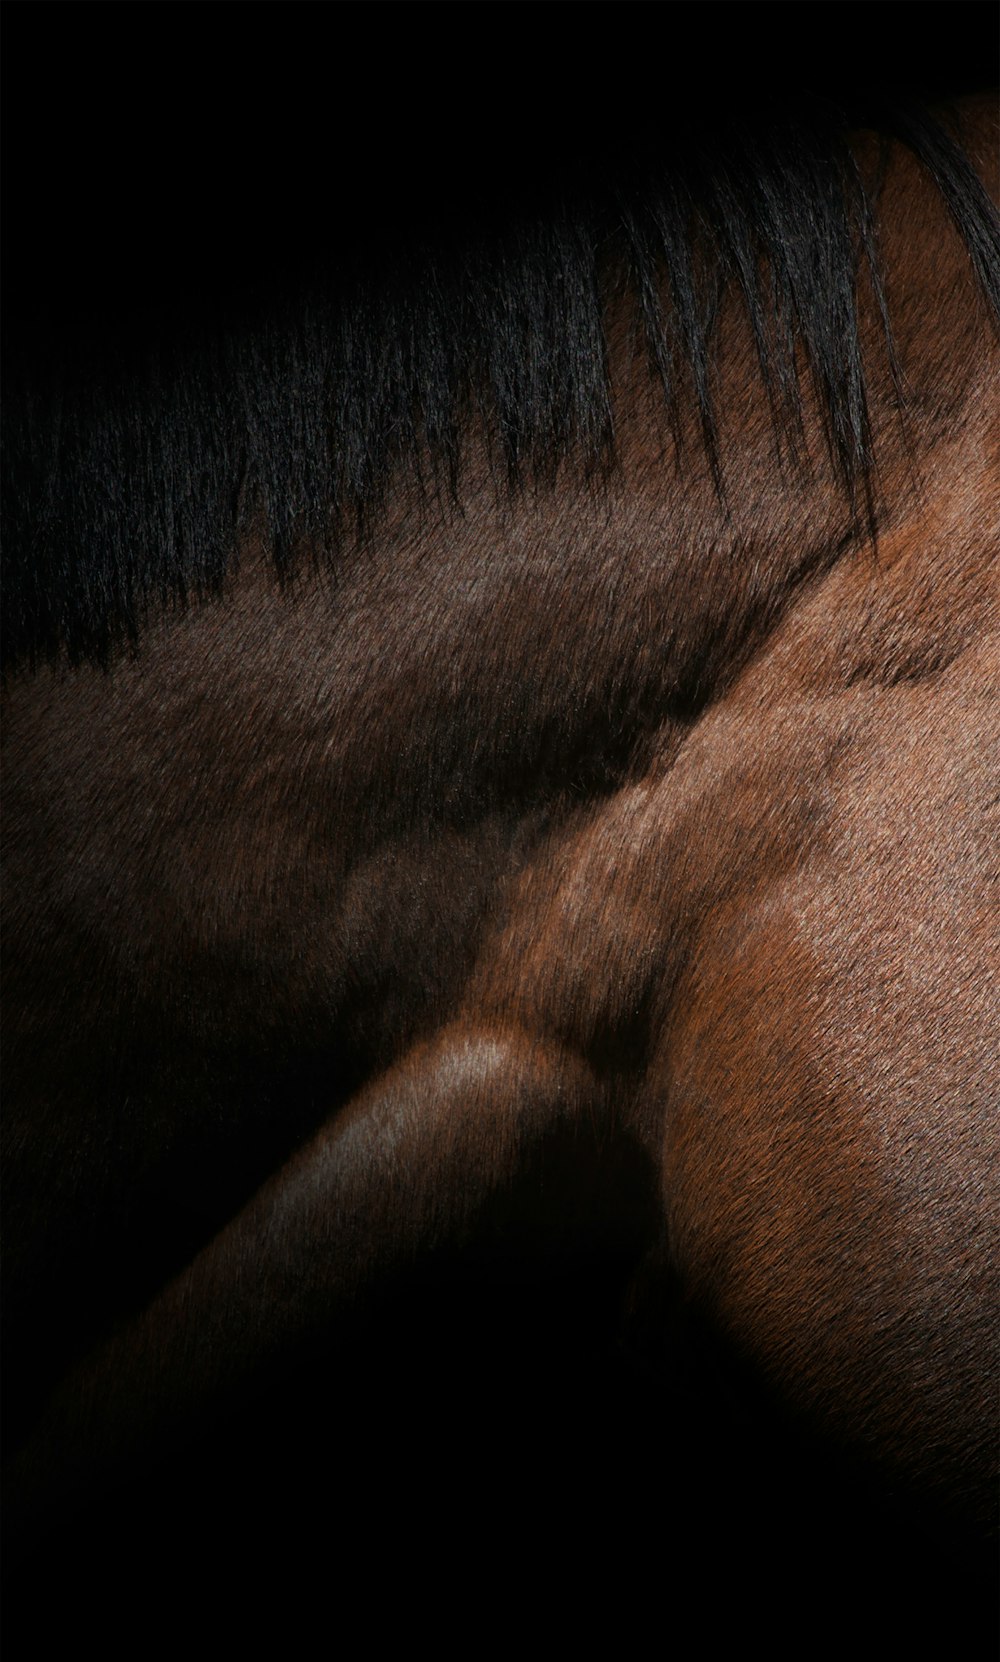 a close up of a horse's head and mane